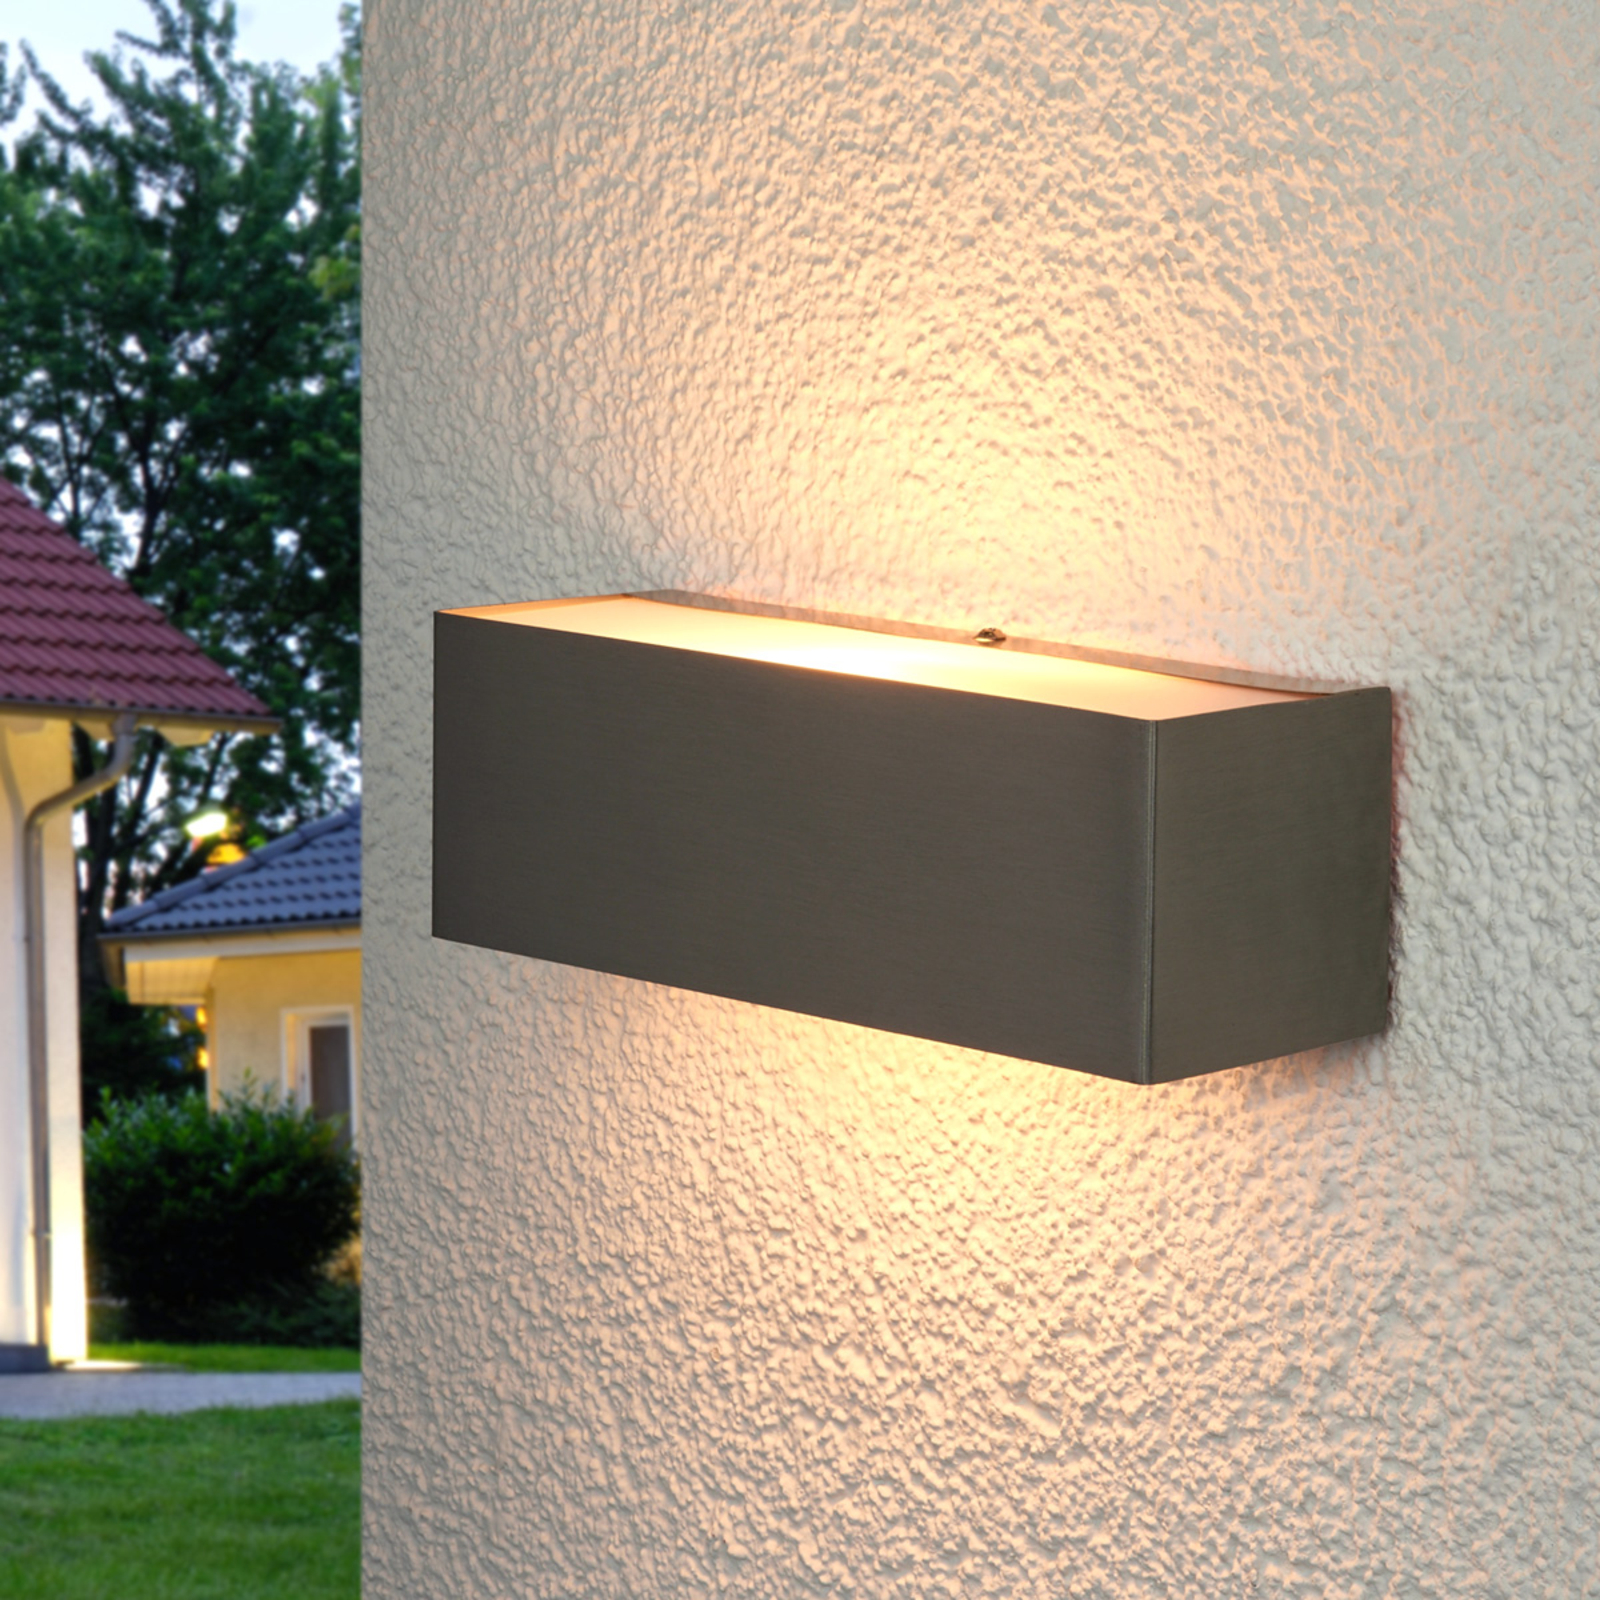 Rectangular wall lamp Alicia for outdoors